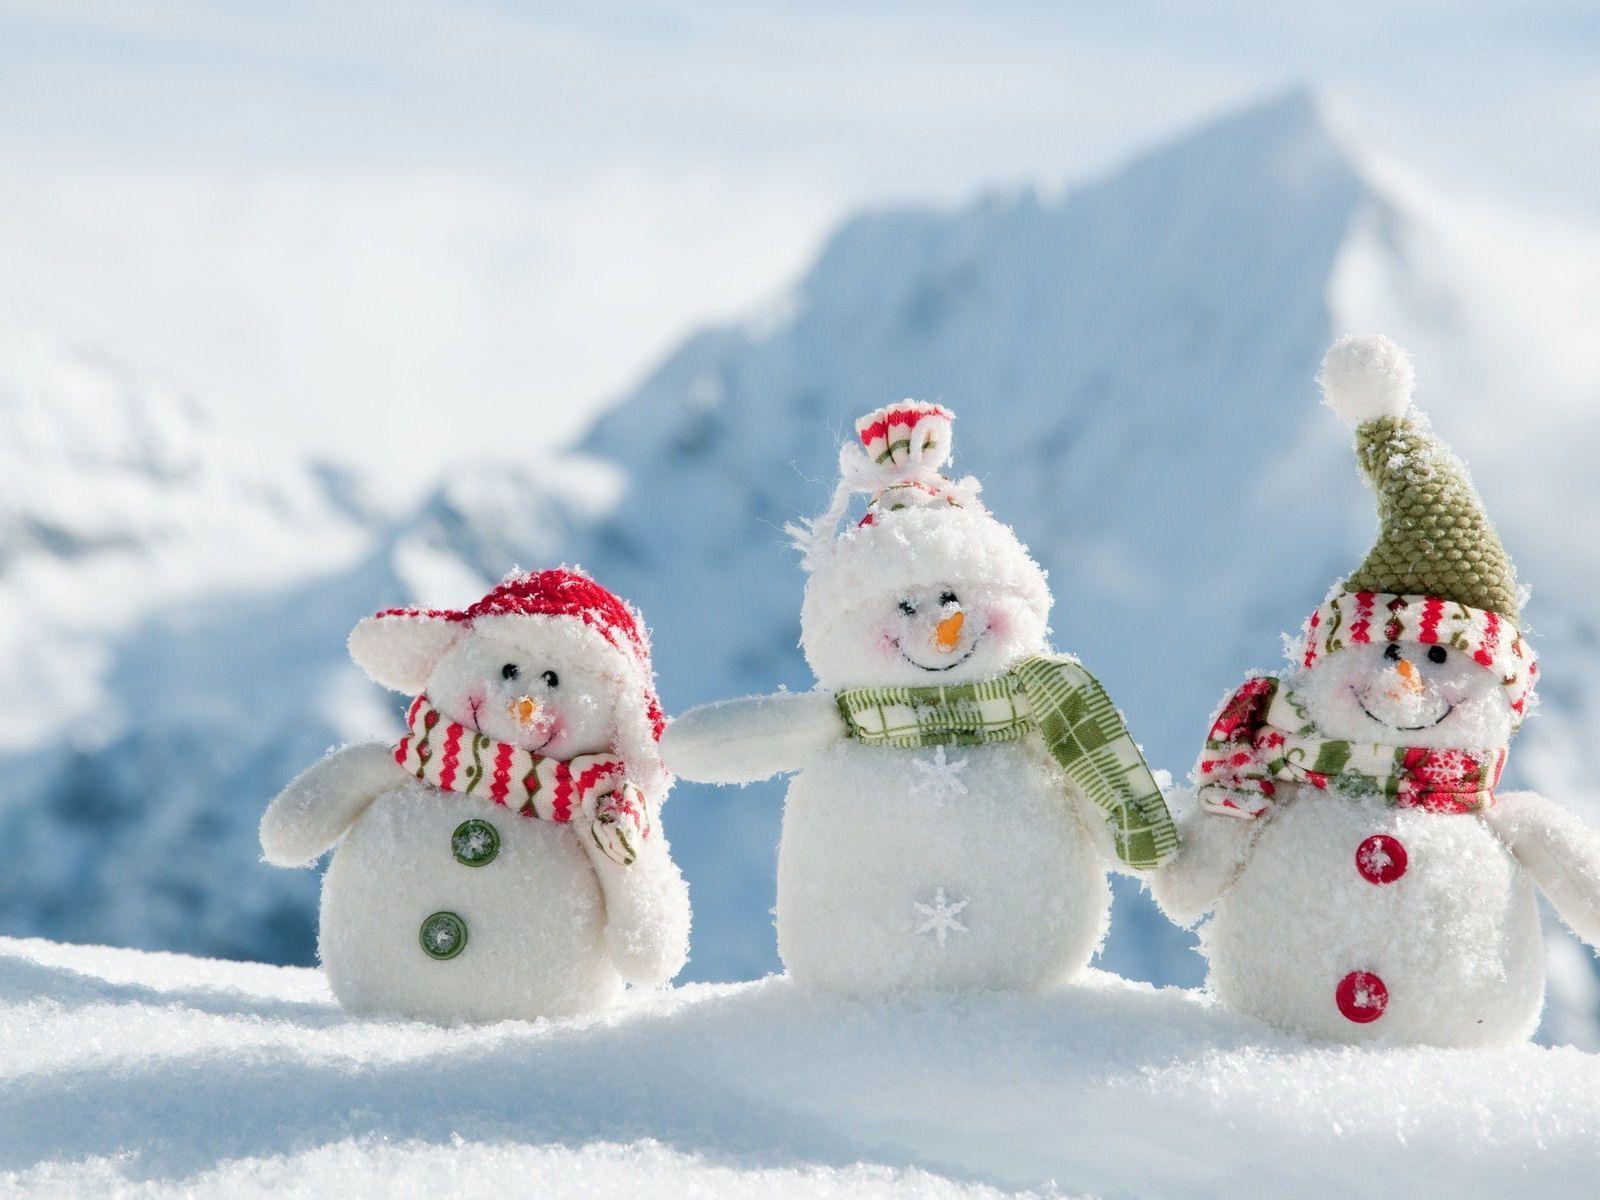 Cool Background Snowman Christmas Image, Wallpaper, HD